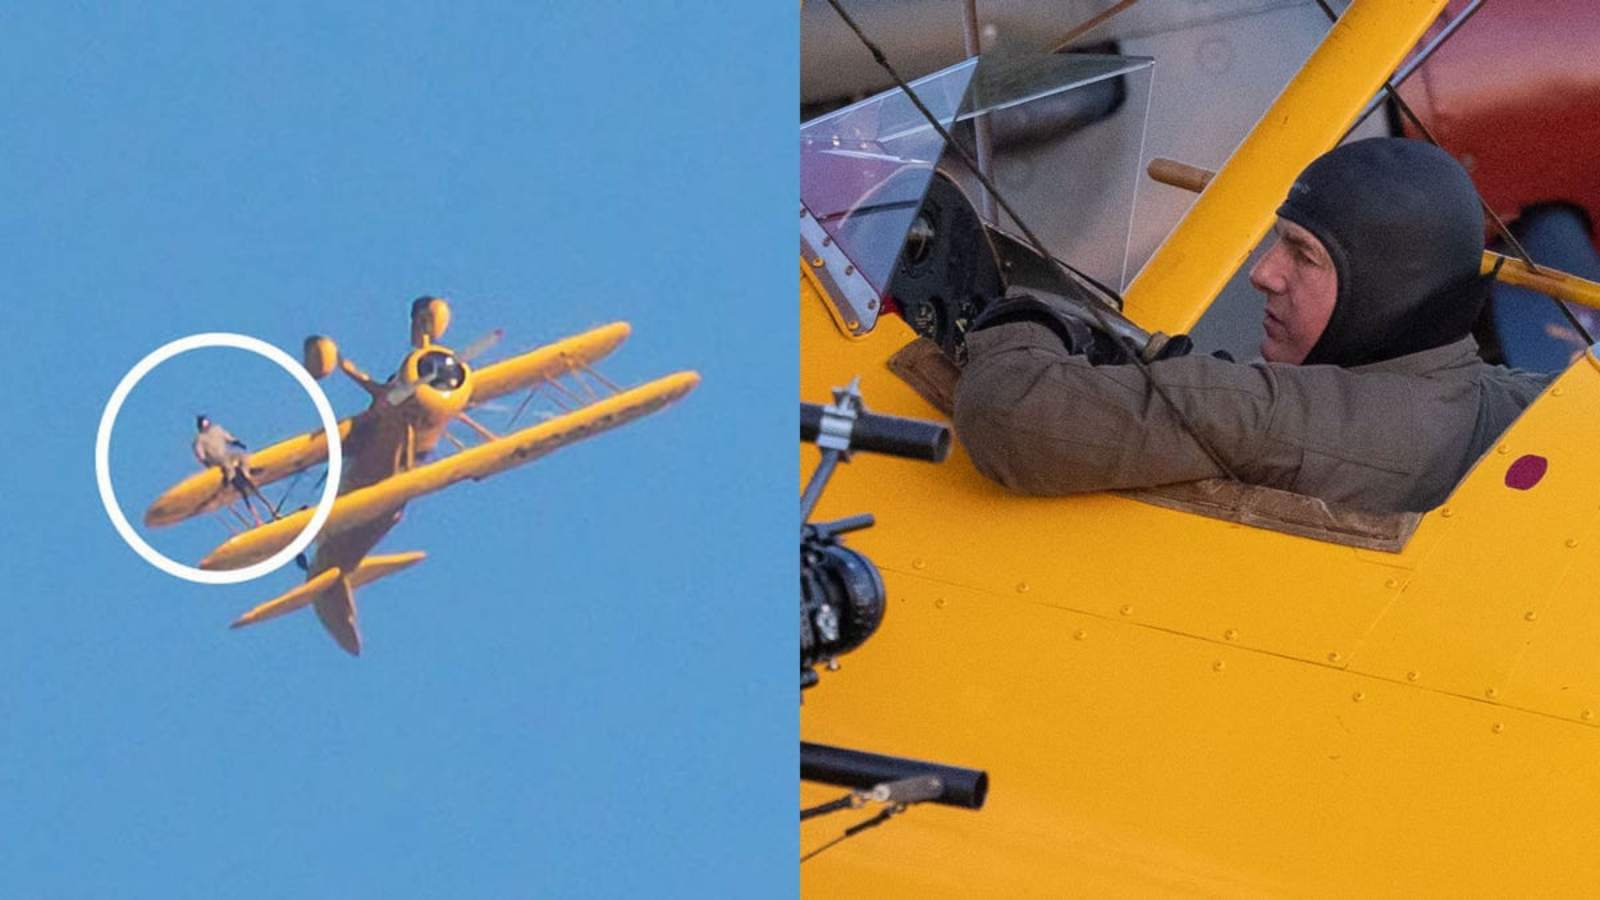 Tom Cruise spotted practicing aerial stunts on an airplane